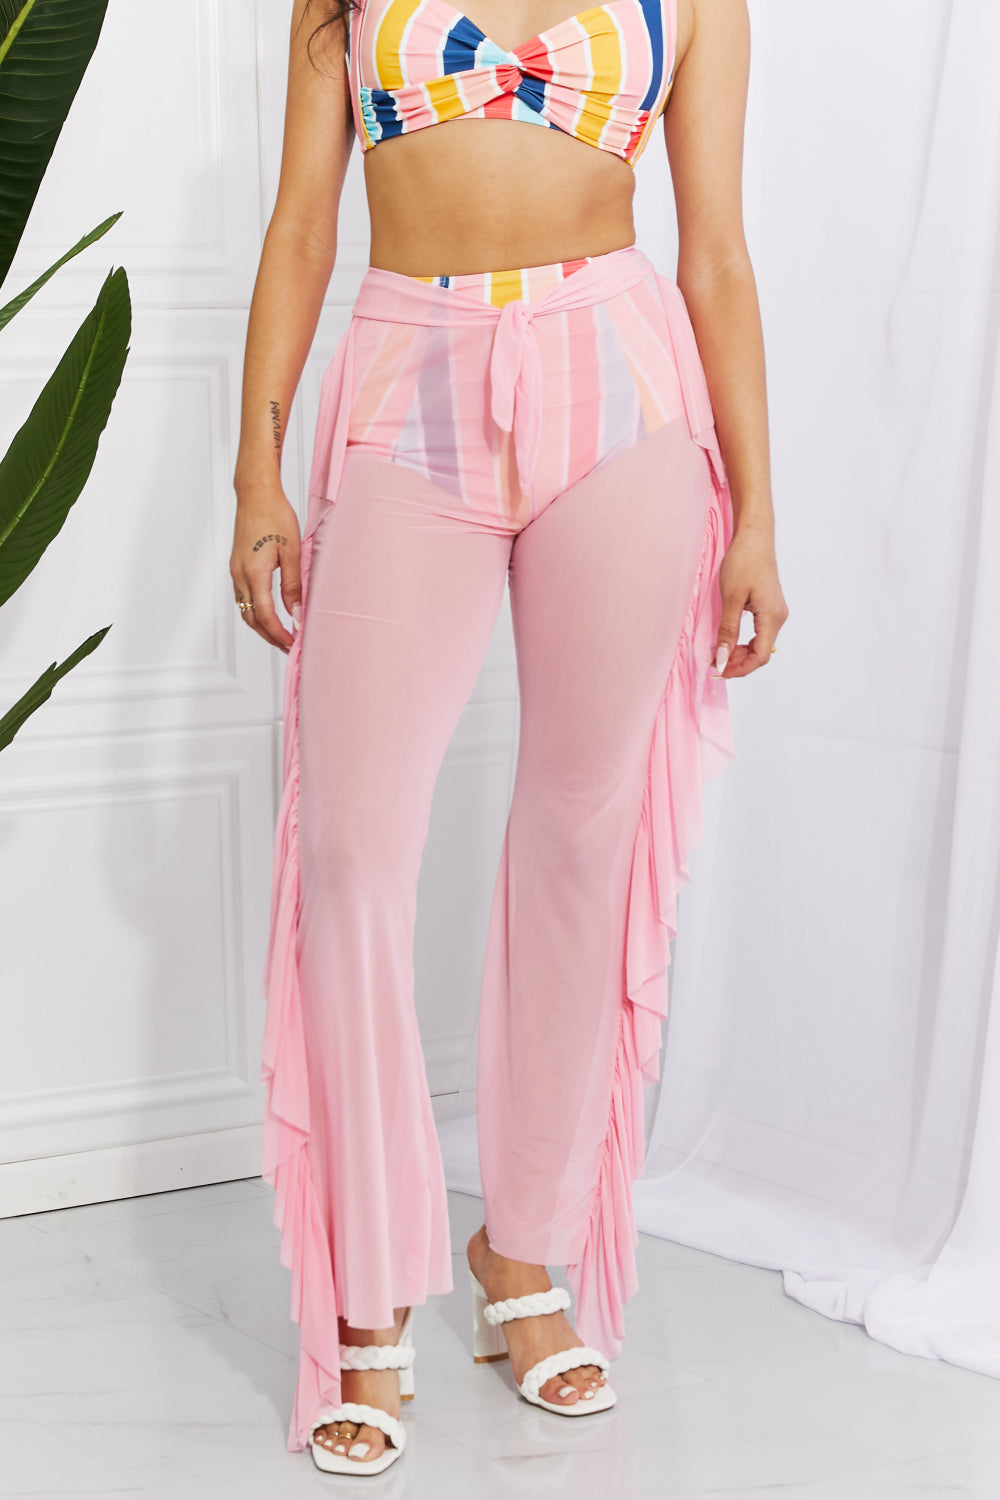 BLUSH PINK ONE SIZE - Marina West Swim Take Me To The Beach Mesh Ruffle Cover-Up Pants - Ships from The US - womens cover up at TFC&H Co.